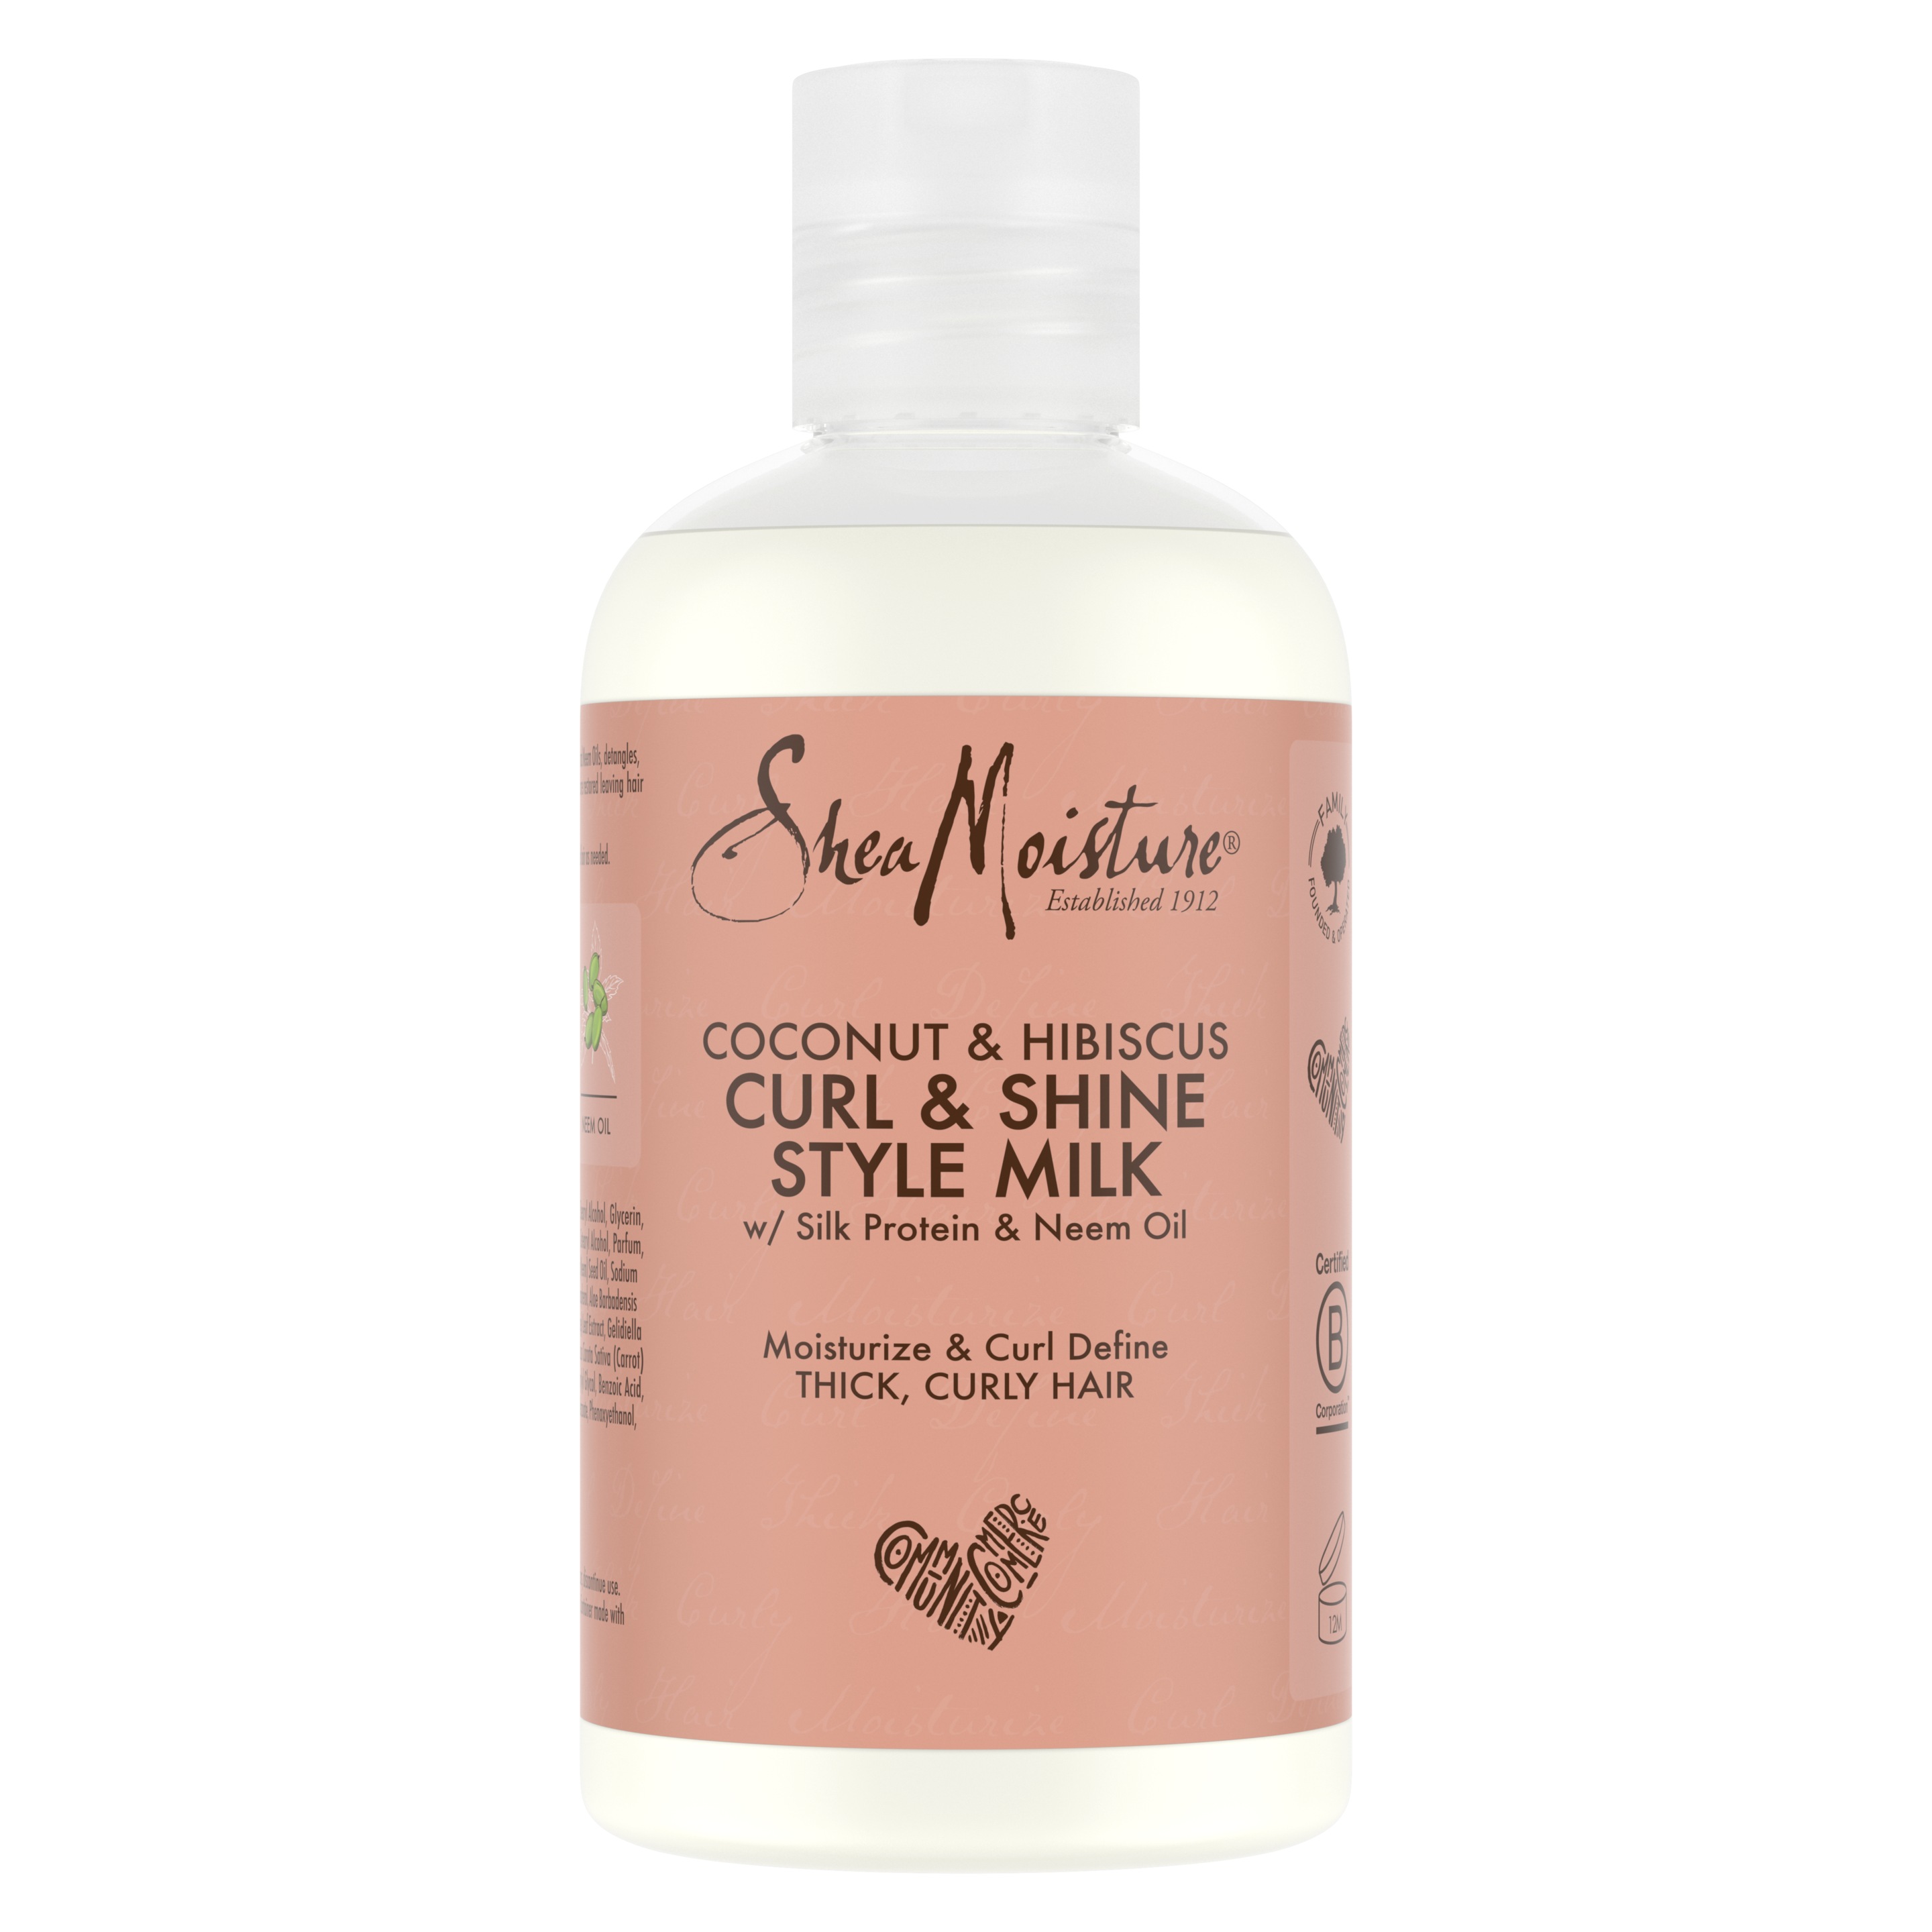 Coconut & Hibiscus Curl & Style Styling Milk